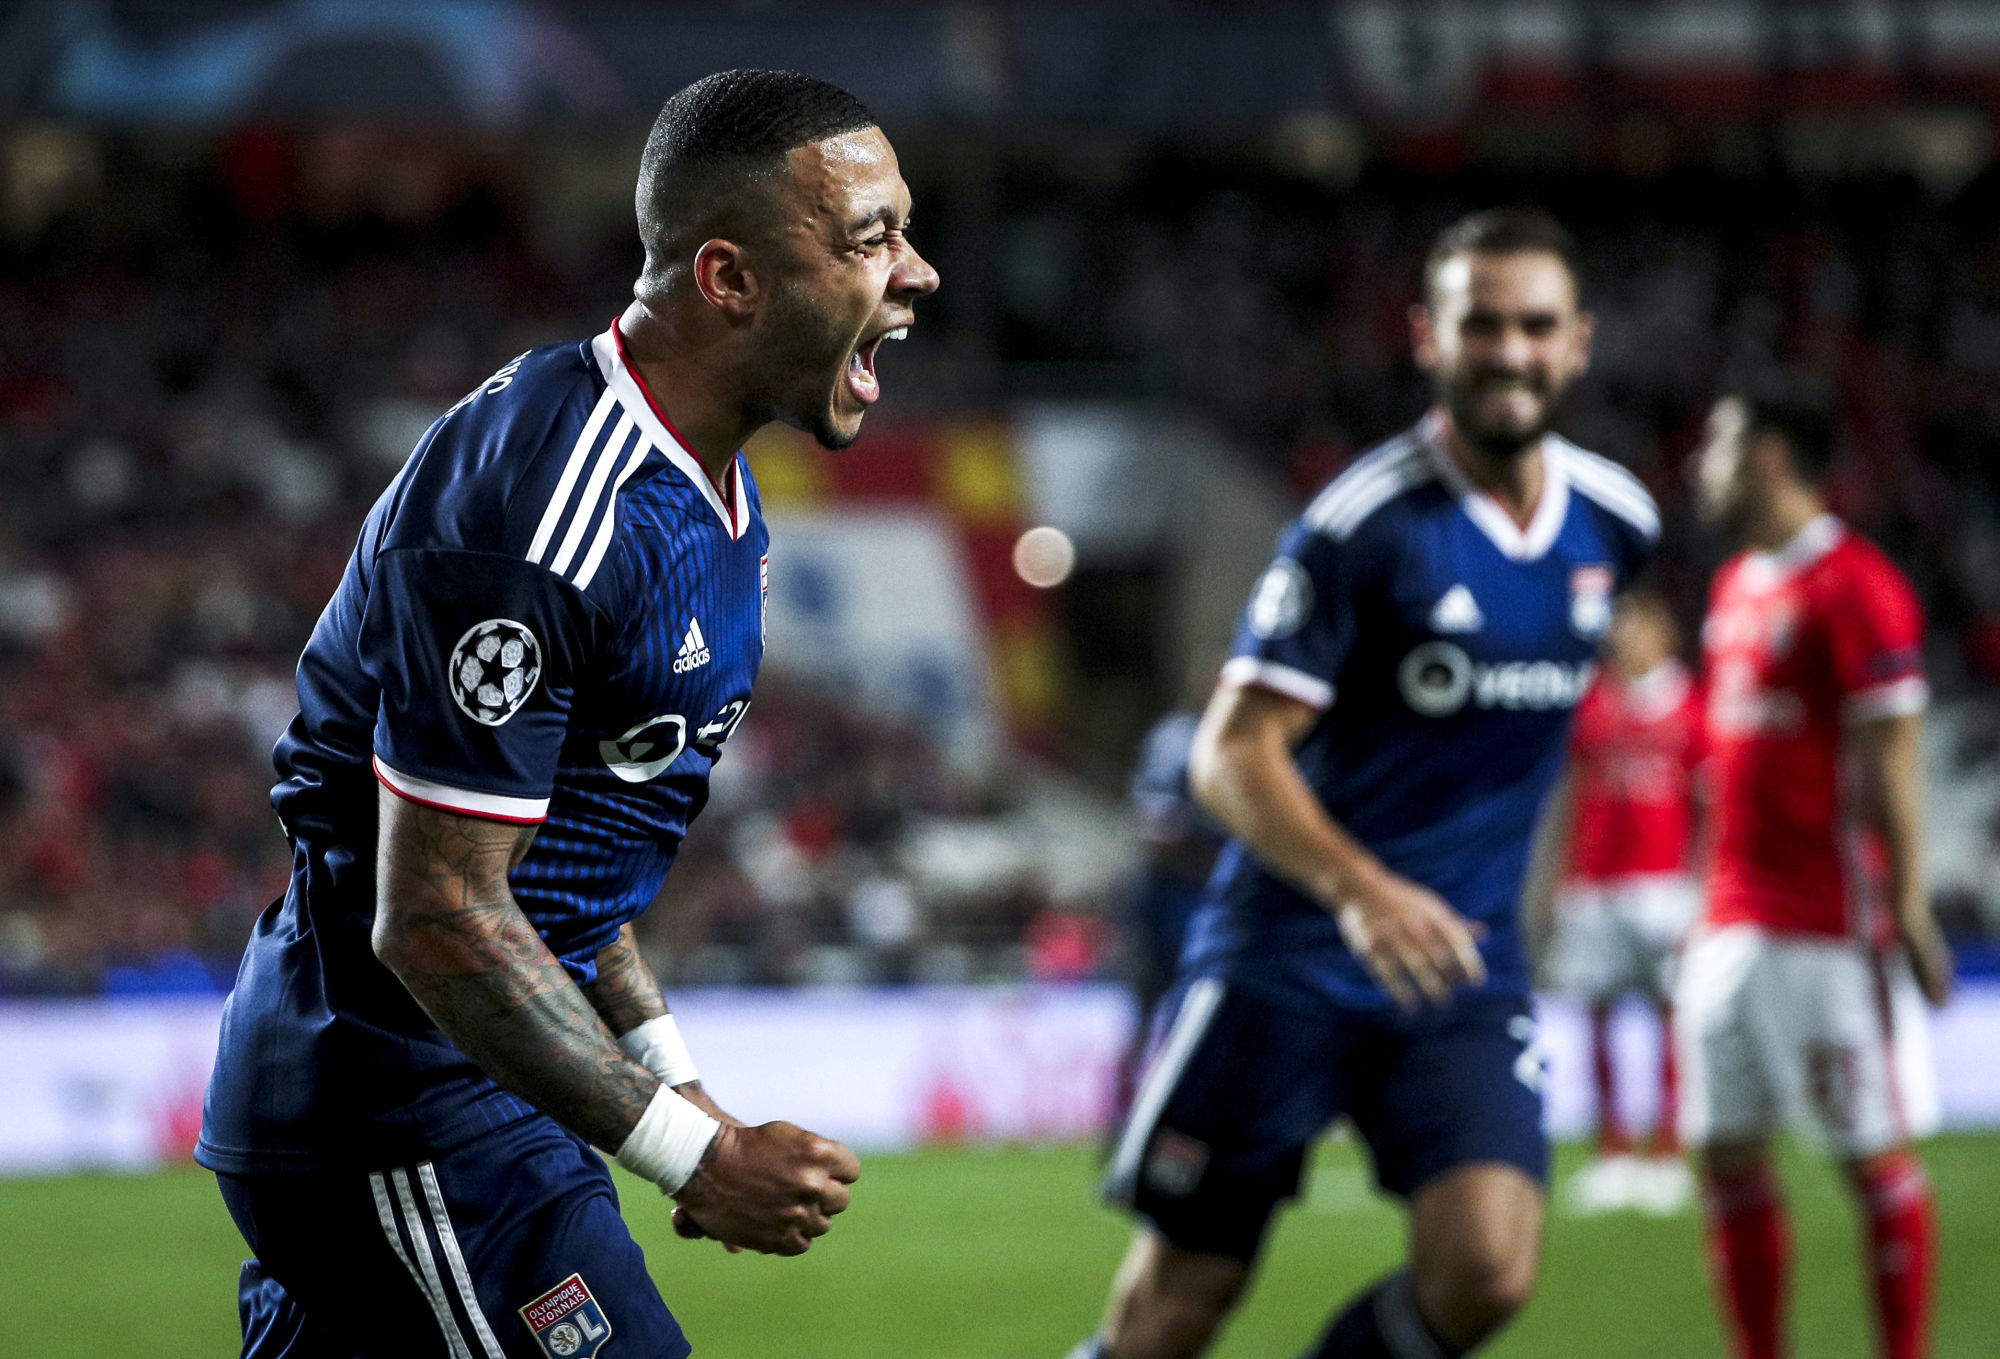 Lisbon, 10/23/2019 - Sport Lisboa e Benfica hosted Olympique Lyonnais tonight at the Estádio da Luz in Lisbon, in a match counting for the third round of the 2019/20 Champions League group stage. Memphis Depay Goal Celebration (1-1) (Filipe Amorim / Global Images) 

Photo by Icon Sport - Memphis DEPAY - Estàdio da Luz - Lisbonne (Portugal)